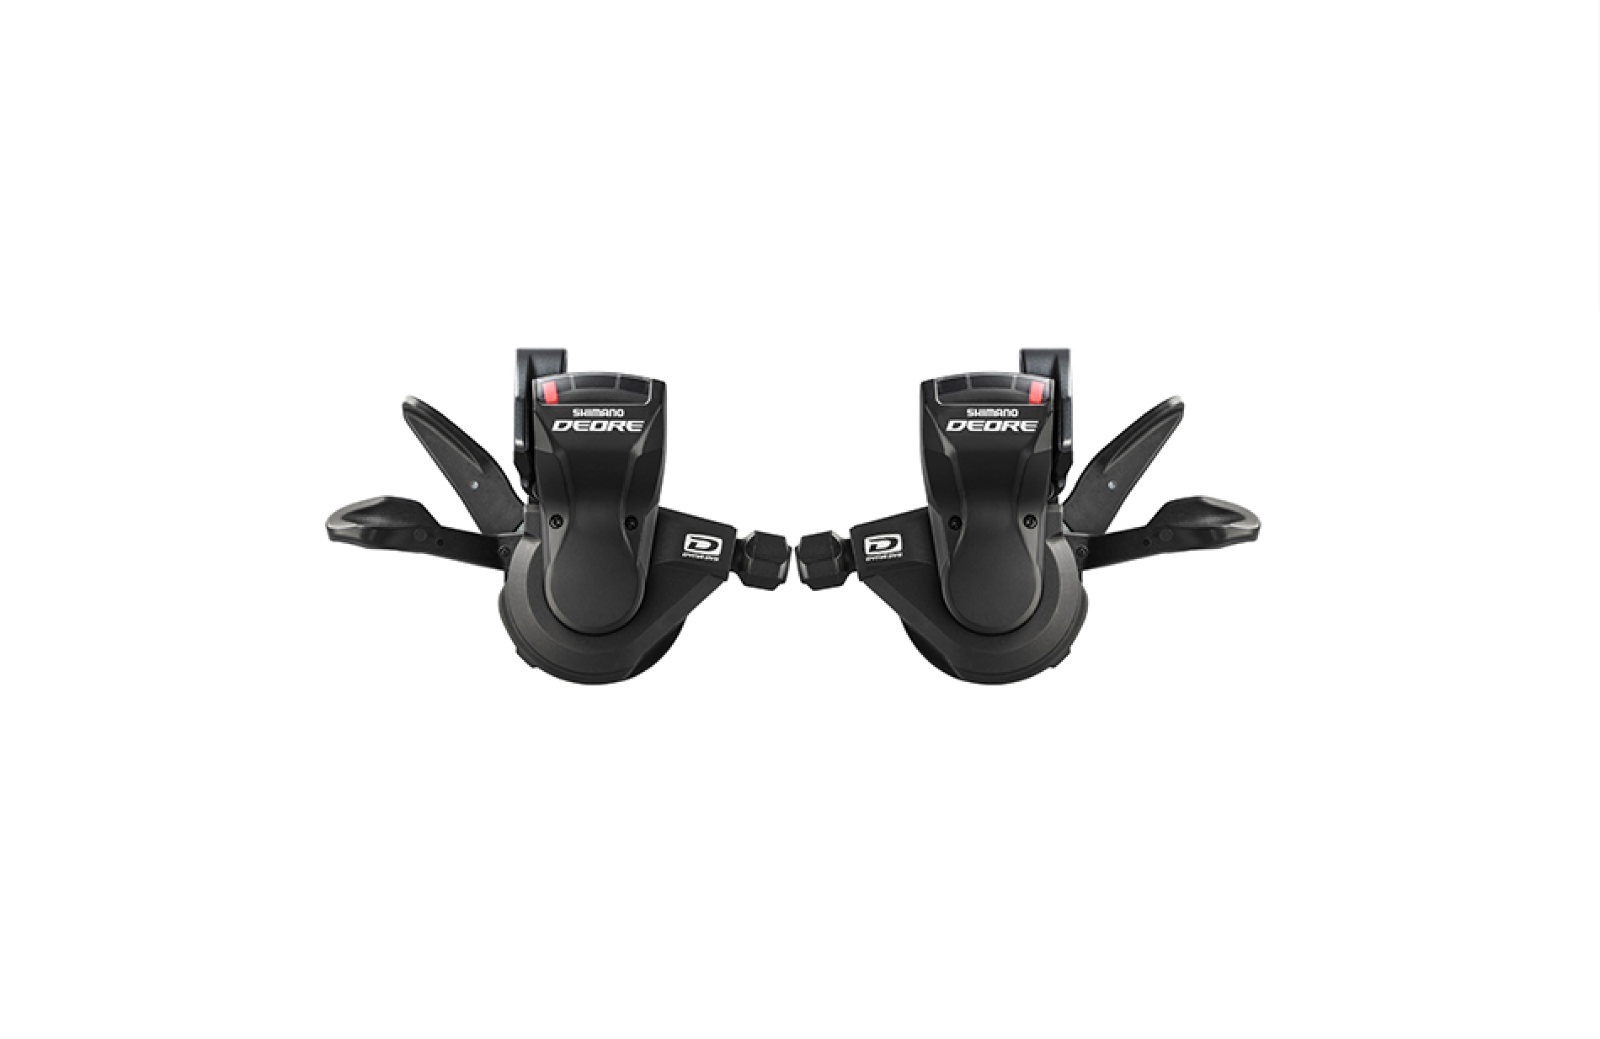 Shimano Deore M591 10 x 3 Speed Shifter Set - Including Gear Cables - Sportandleisure.com (6968089149594)